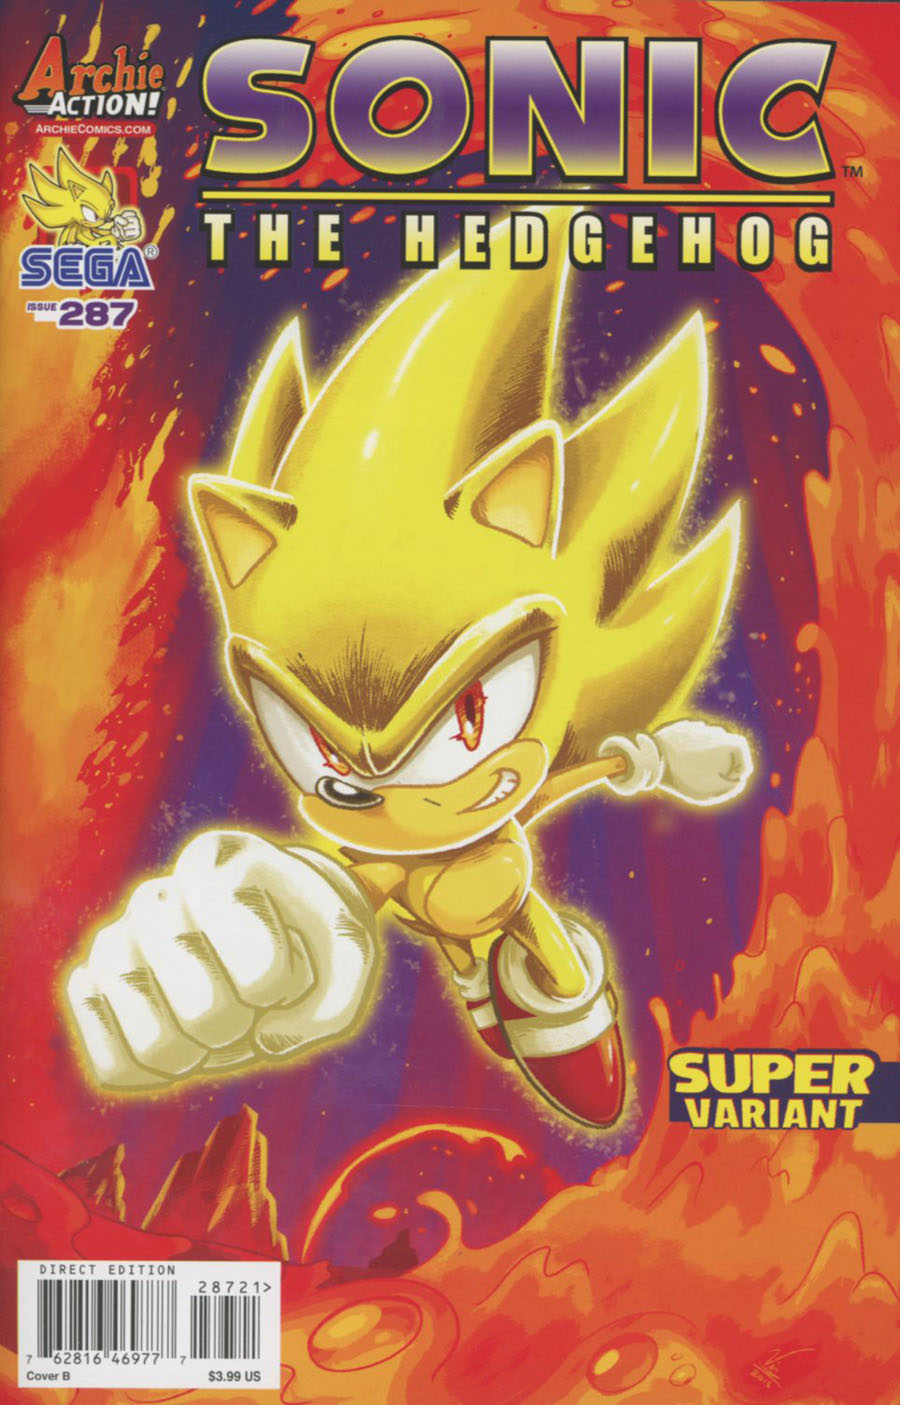 Sonic The Hedgehog Vol 2 #287 Cover B Variant Vincent Lovallo Super Cover